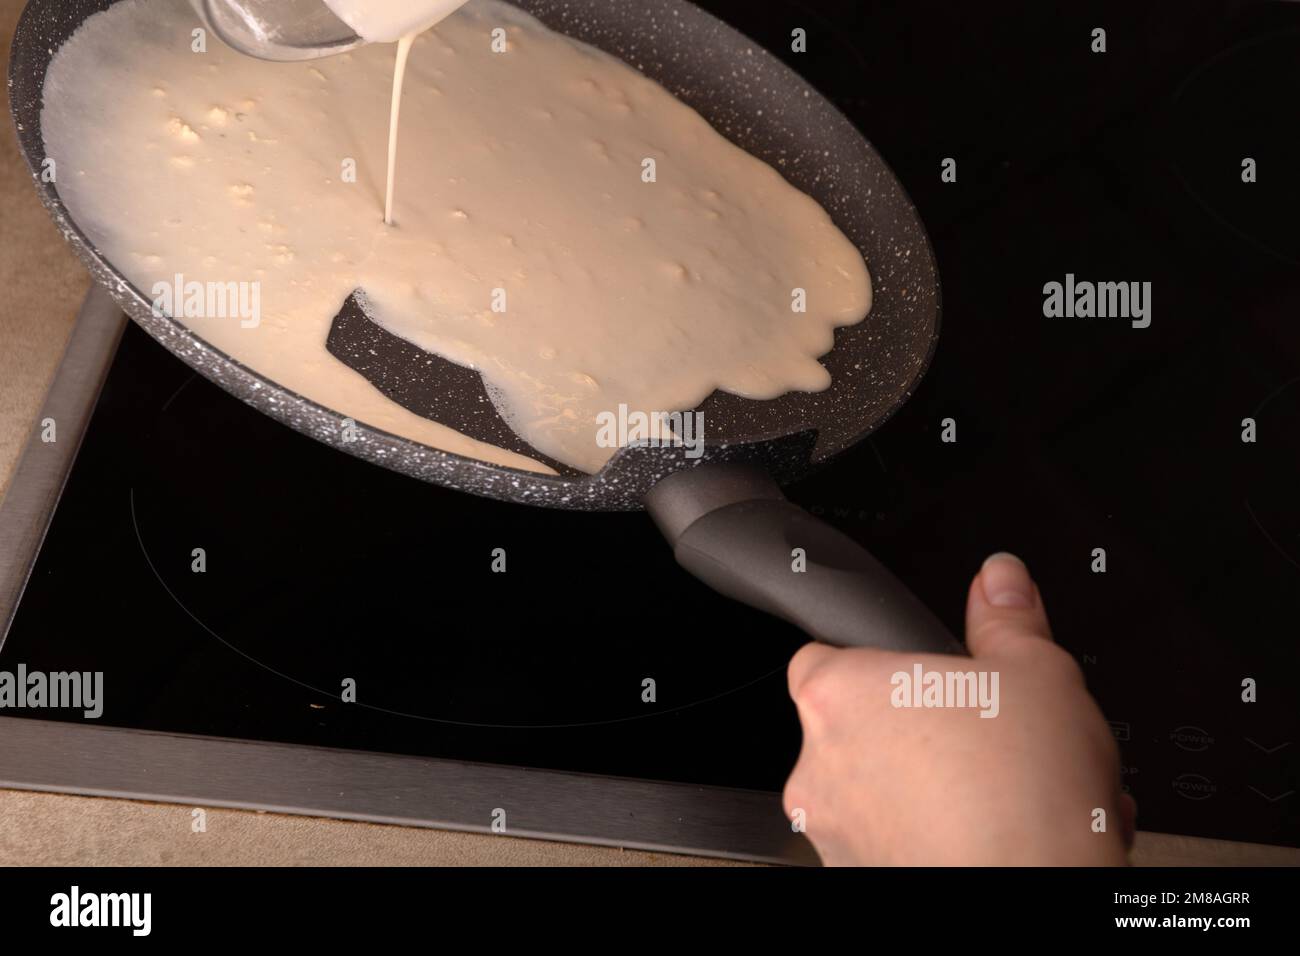 photo of pouring pancake batter on a hot frying pan in the kitchen Stock Photo